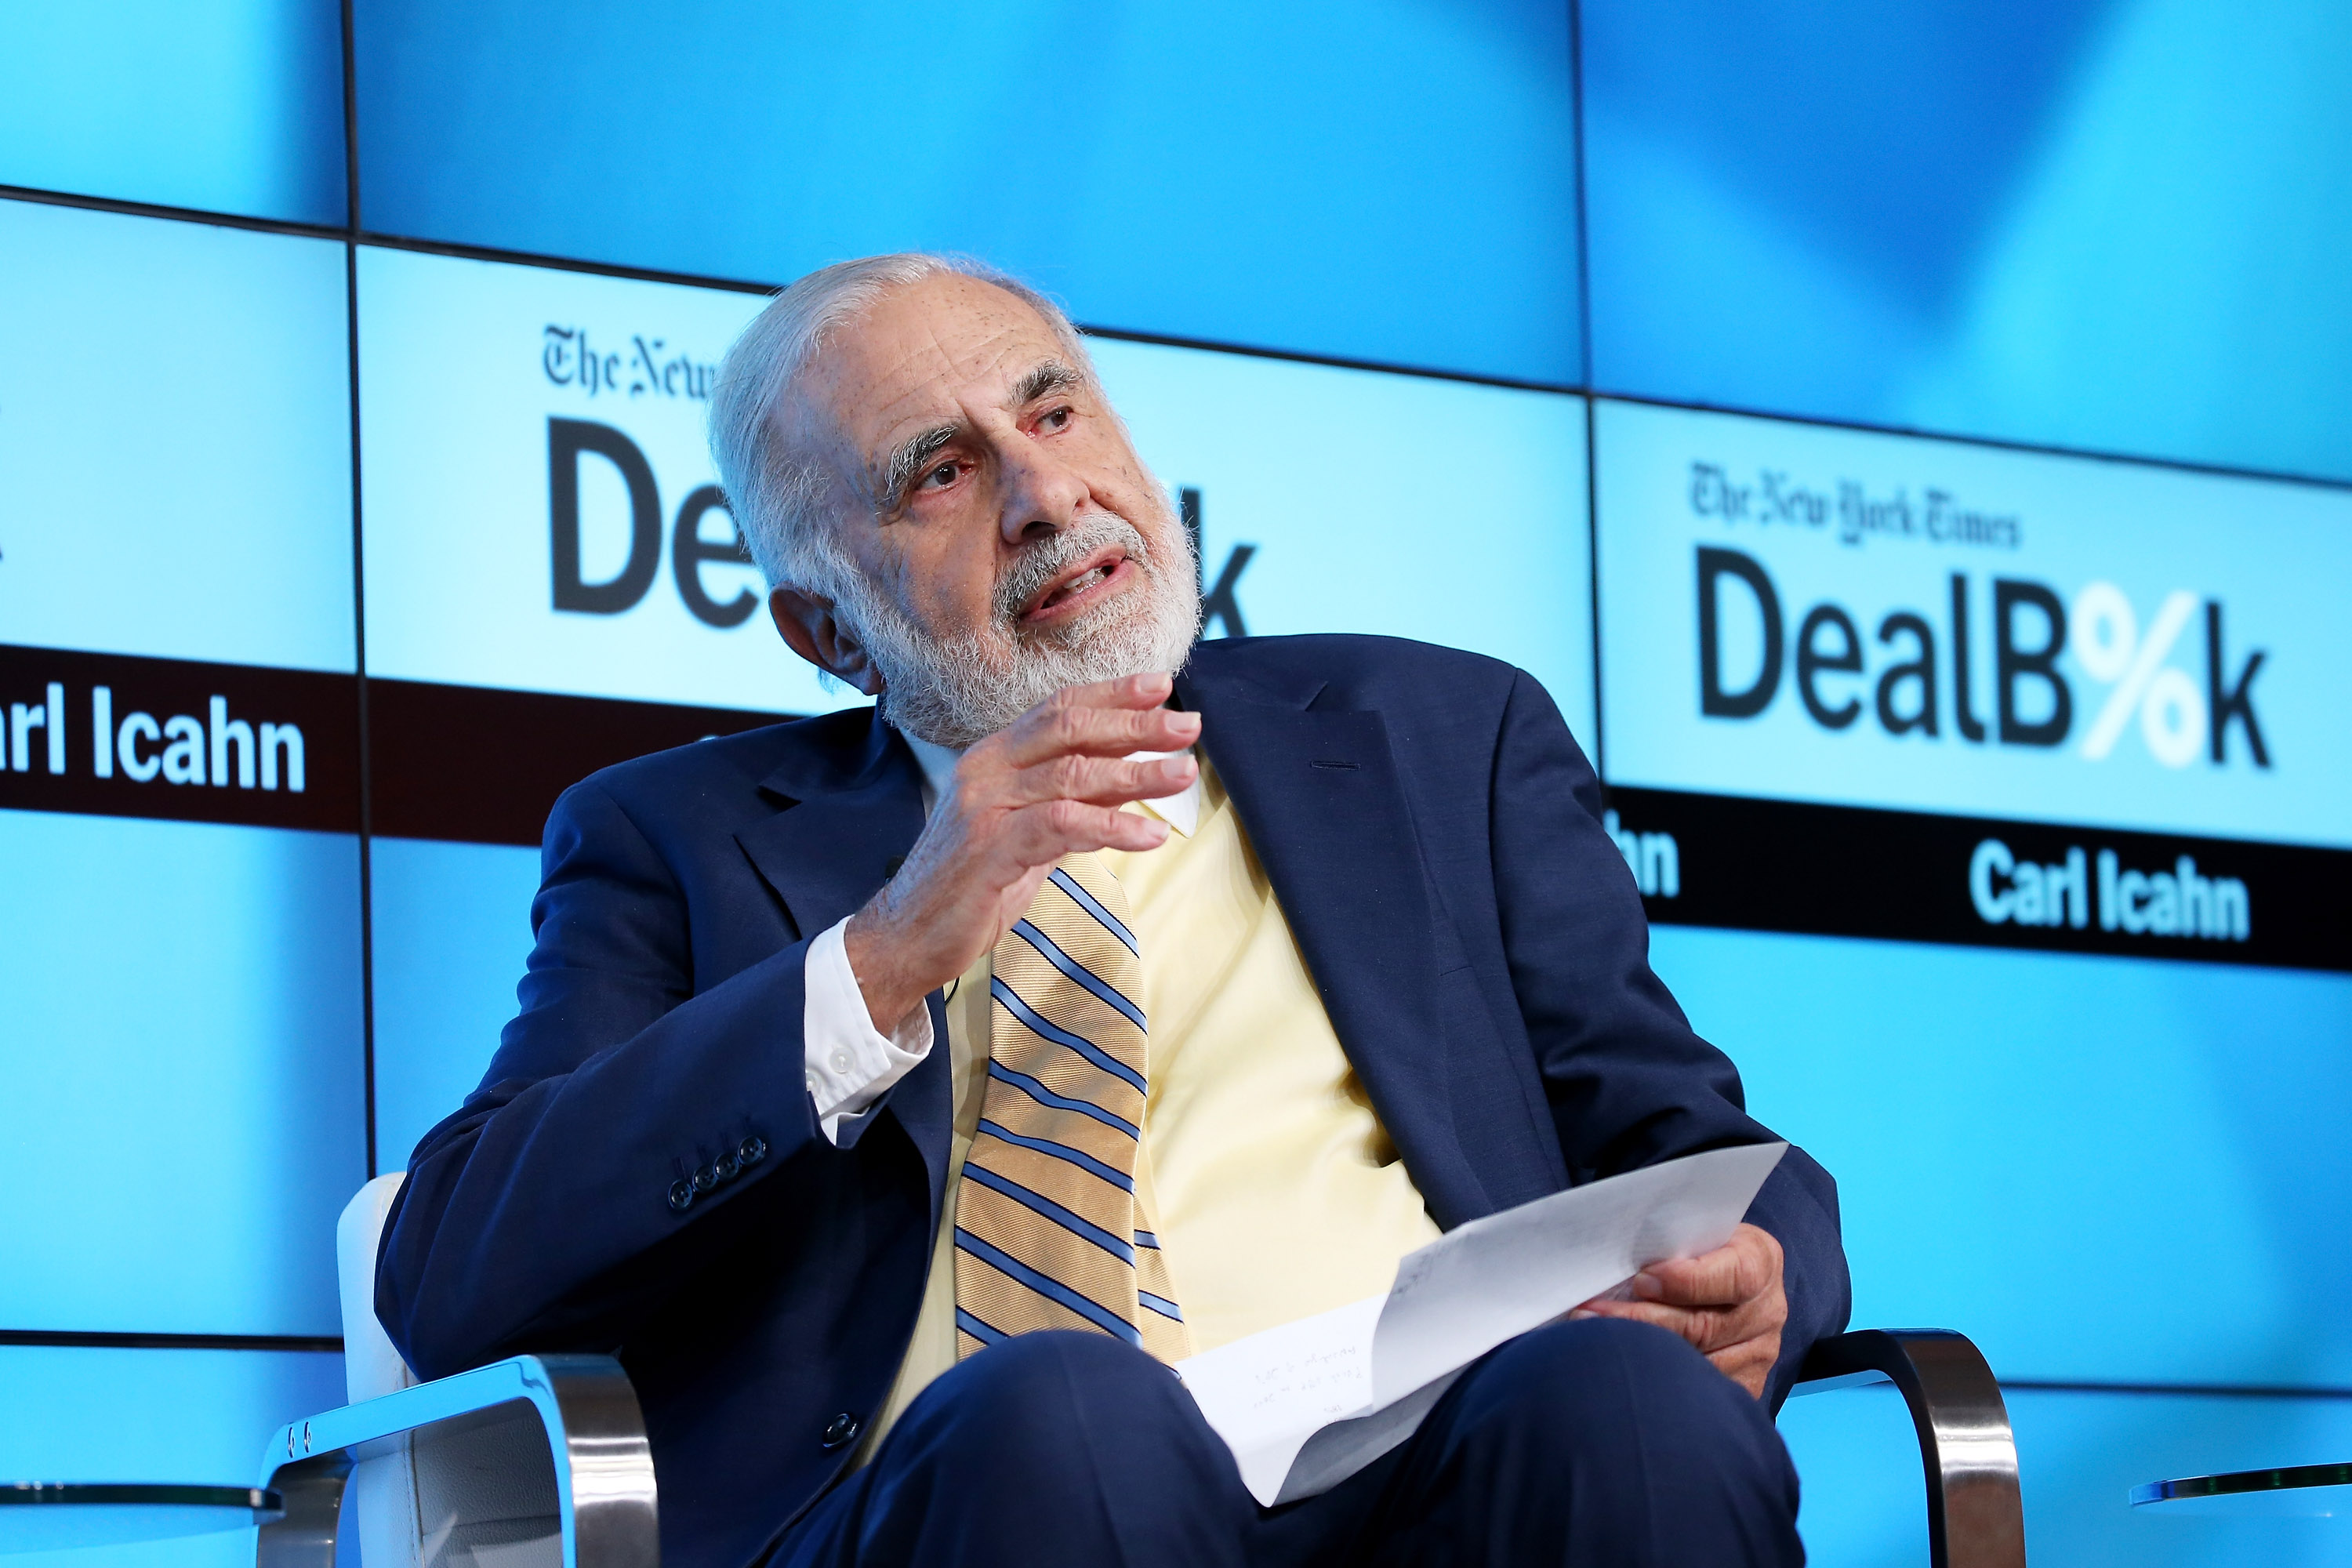 Chairman of Icahn Enterprises Carl Icahn participates in a panel discussion at the New York Times 2015 DealBook Conference at the Whitney Museum of American Art on November 3, 2015 in New York City. (Neilson Barnard—Getty Images / New York Times)